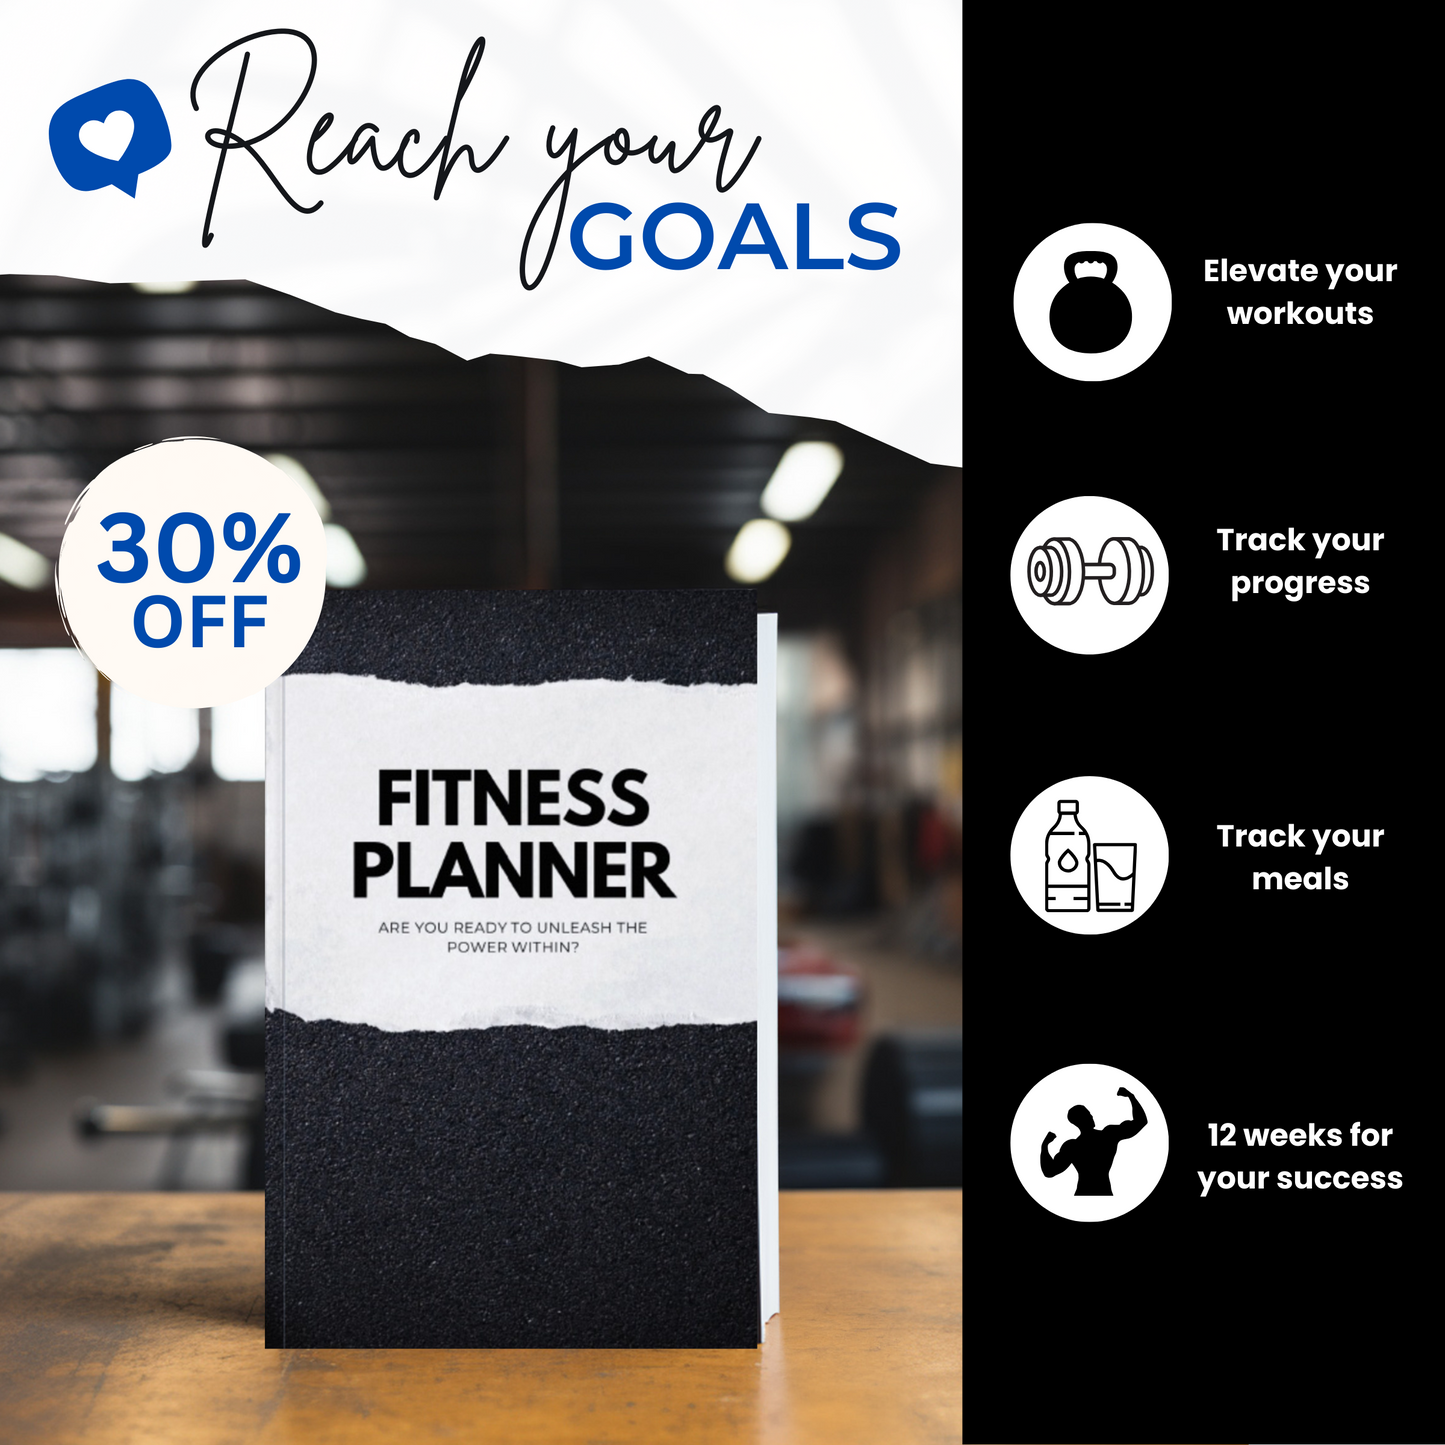 Fitness Planner for Goal-Driven Workouts, Progress and Weight Loss